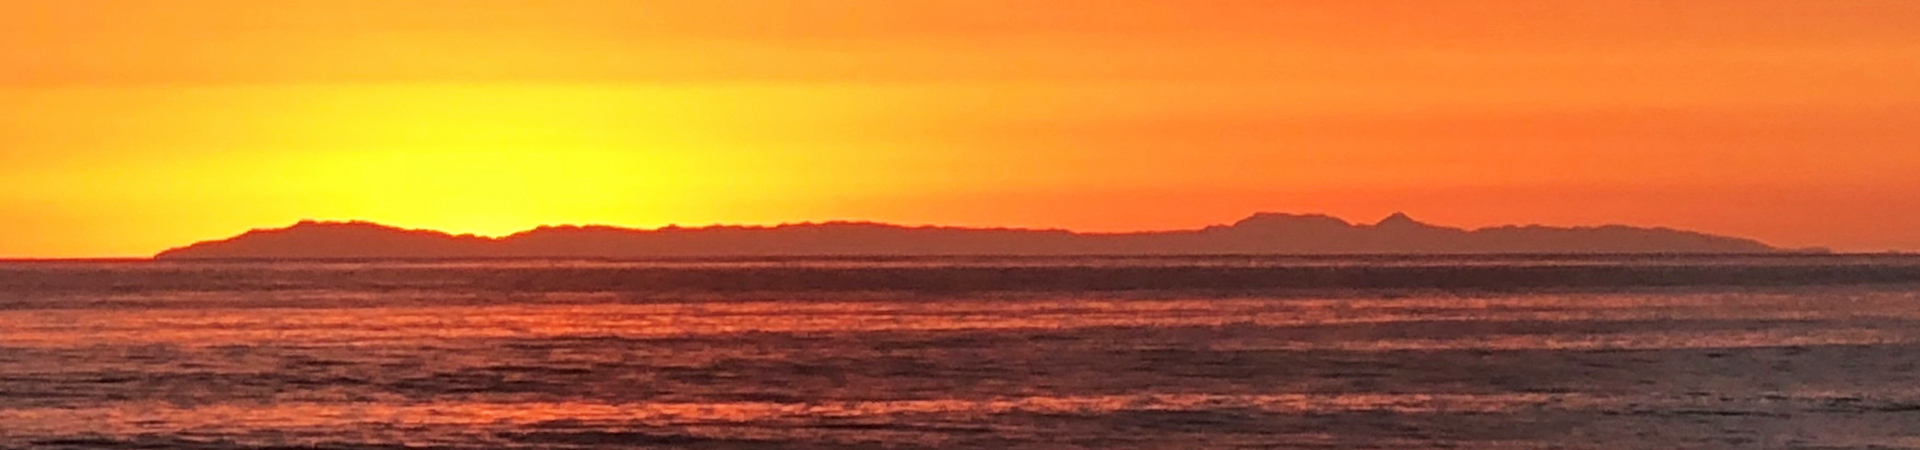 Catalina Island seen from afar at sunset.